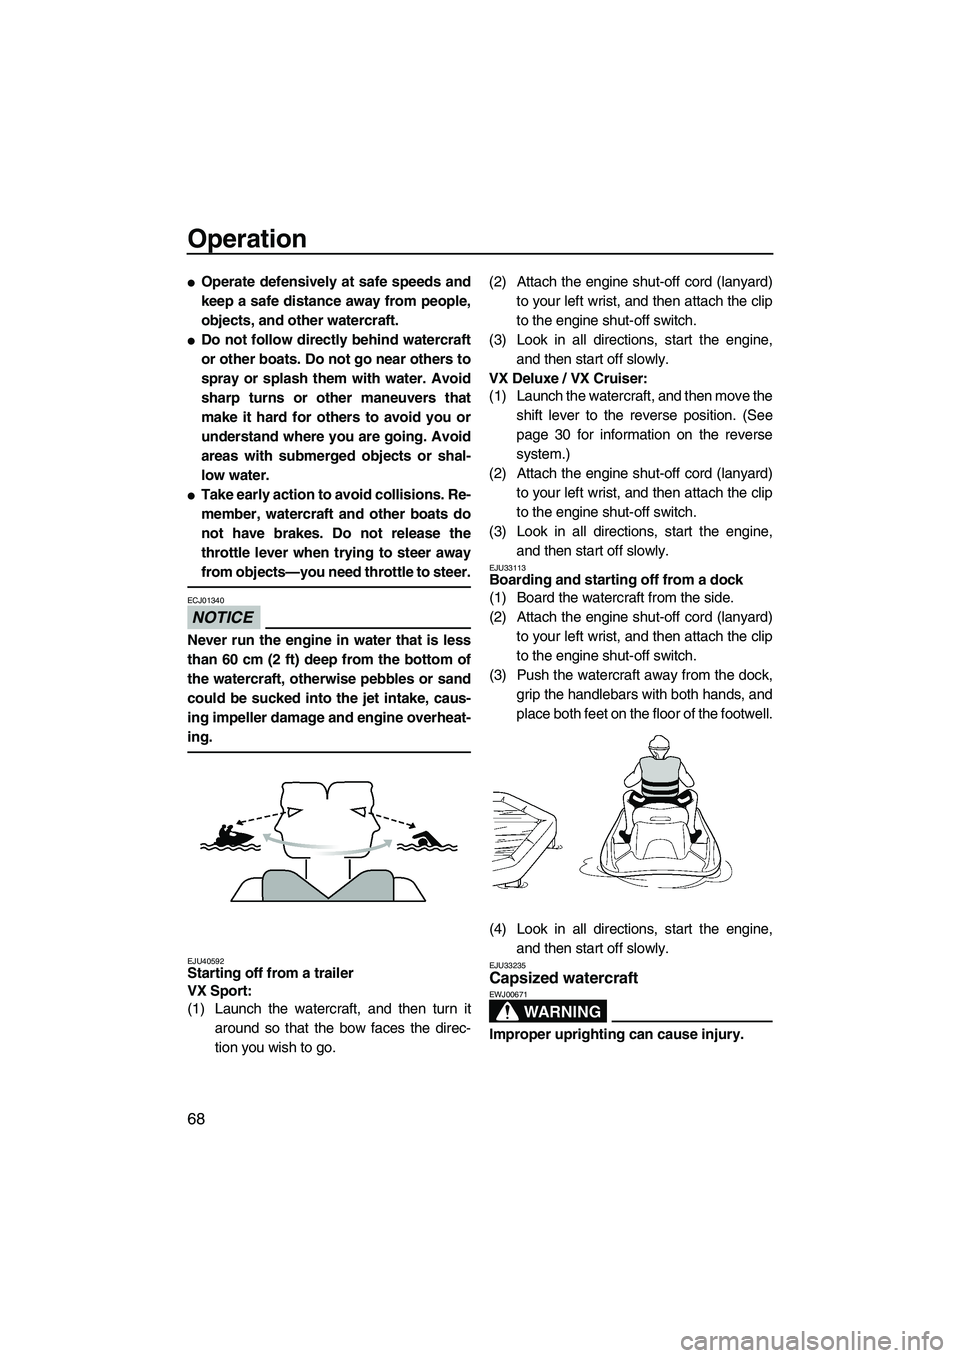 YAMAHA VX DELUXE 2013  Owners Manual Operation
68
●Operate defensively at safe speeds and
keep a safe distance away from people,
objects, and other watercraft.
●Do not follow directly behind watercraft
or other boats. Do not go near 